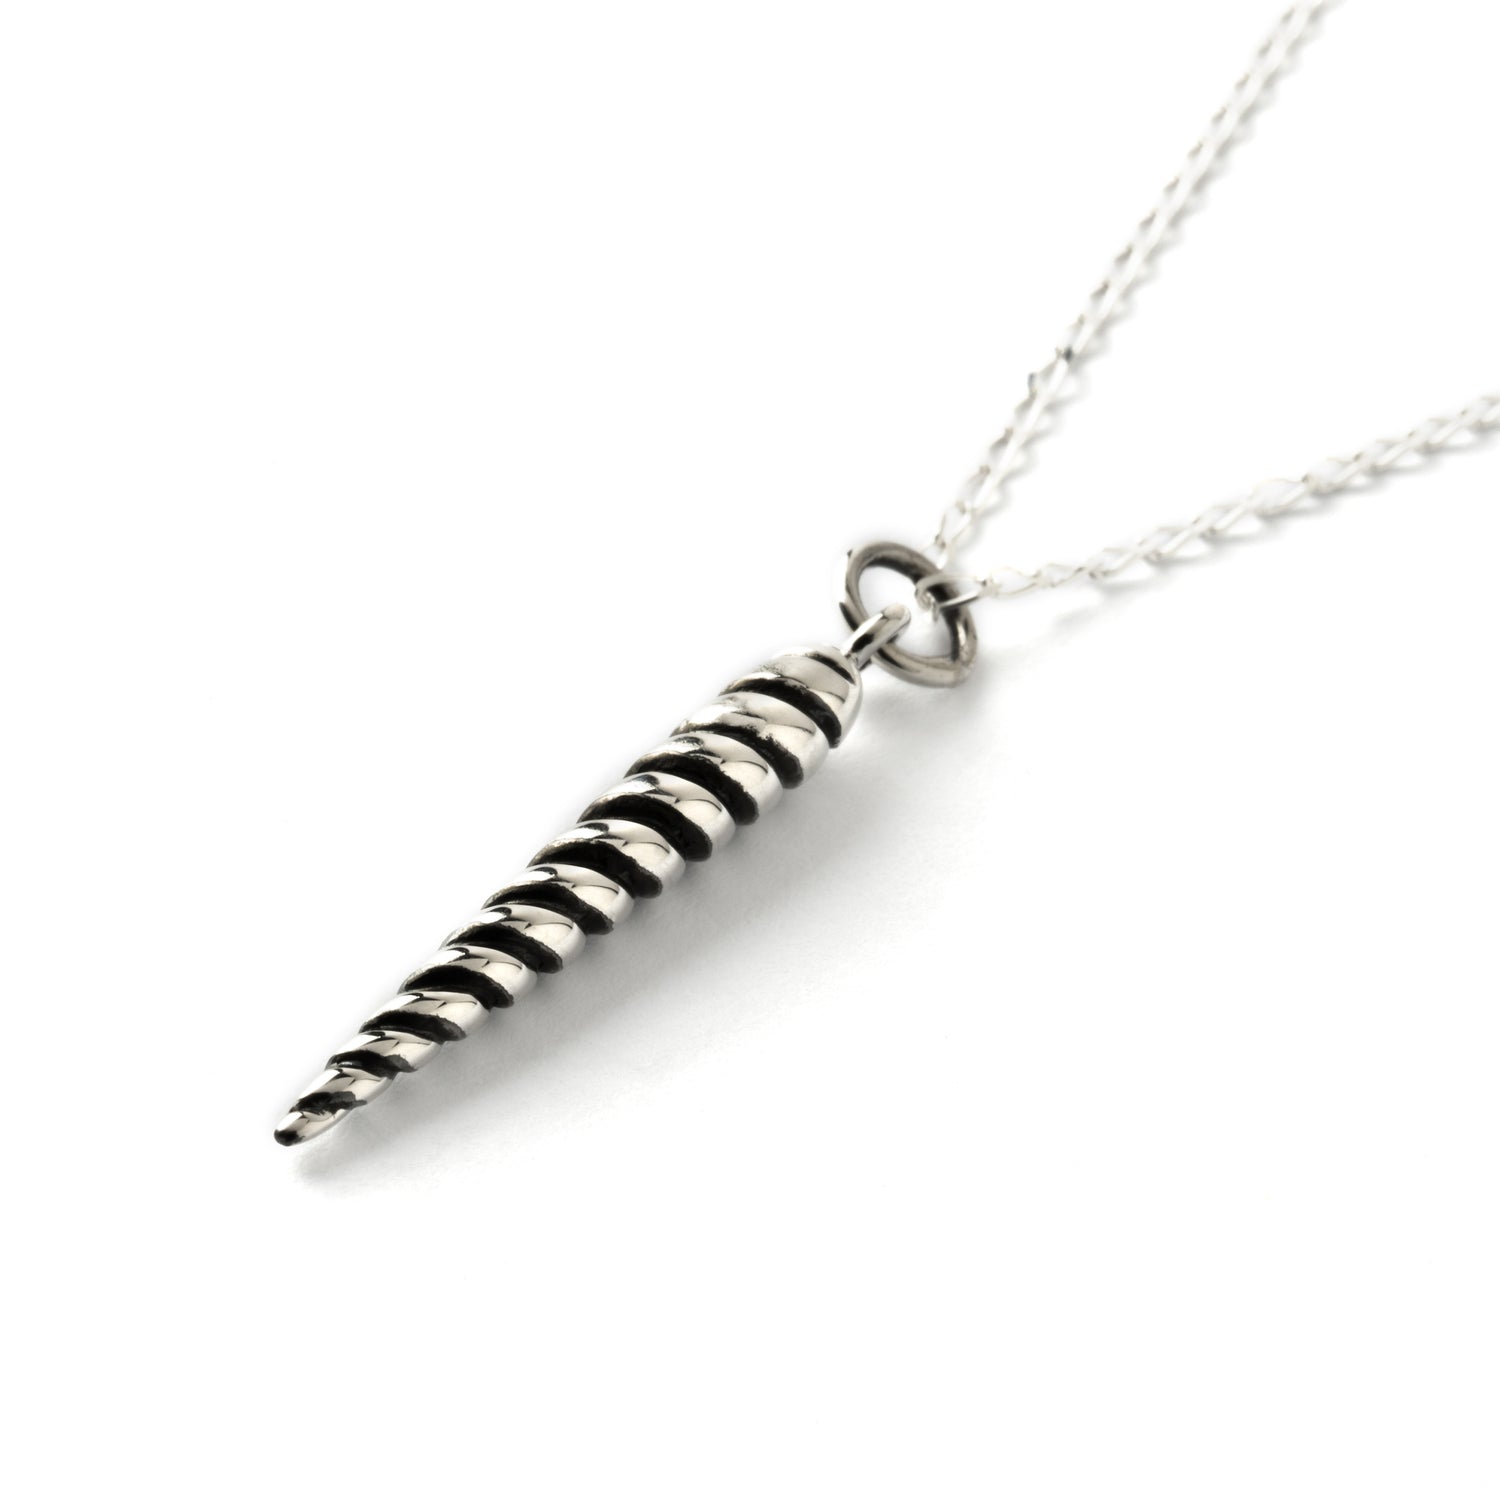 Silver Spiralling Cone Charm necklace right side view